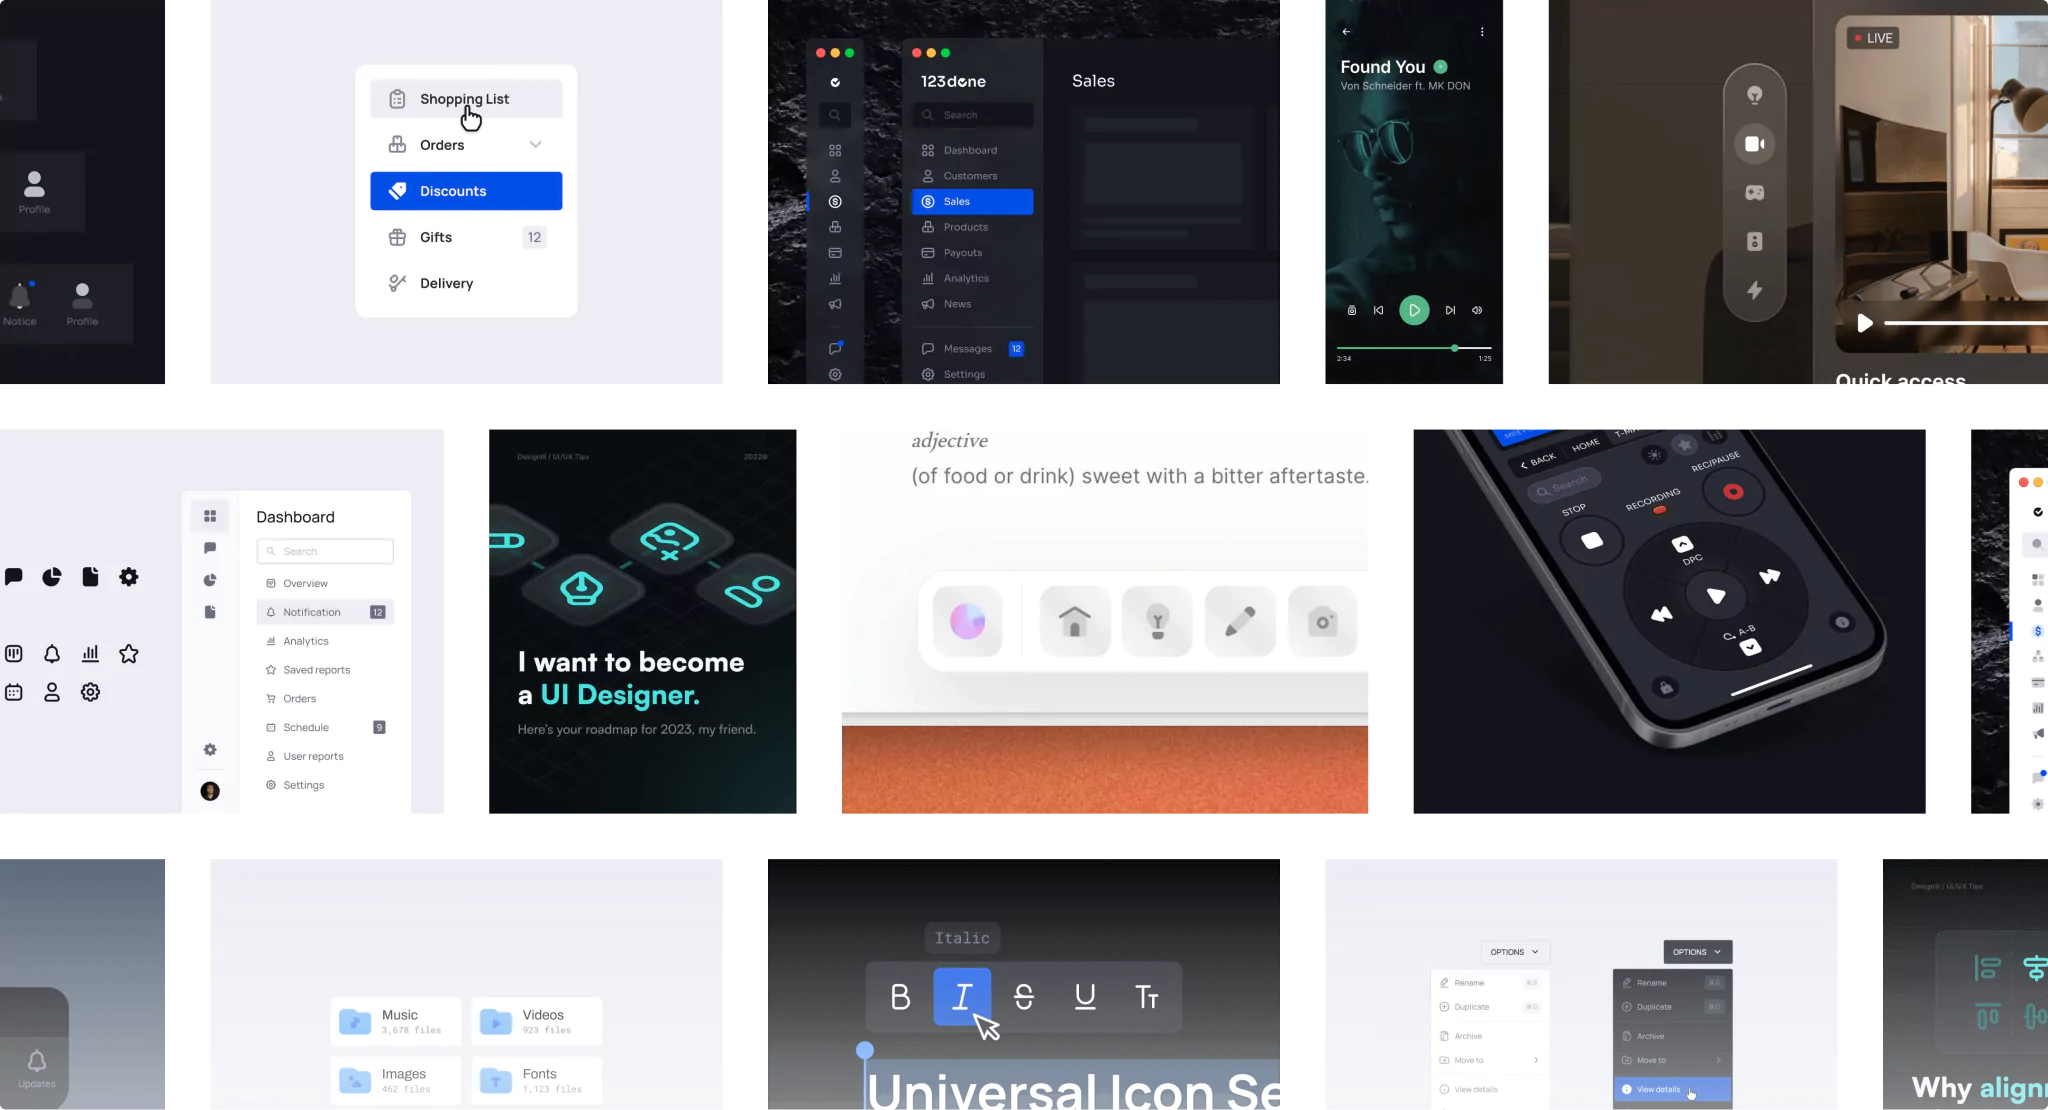 Examples of using the Universal Icon Set